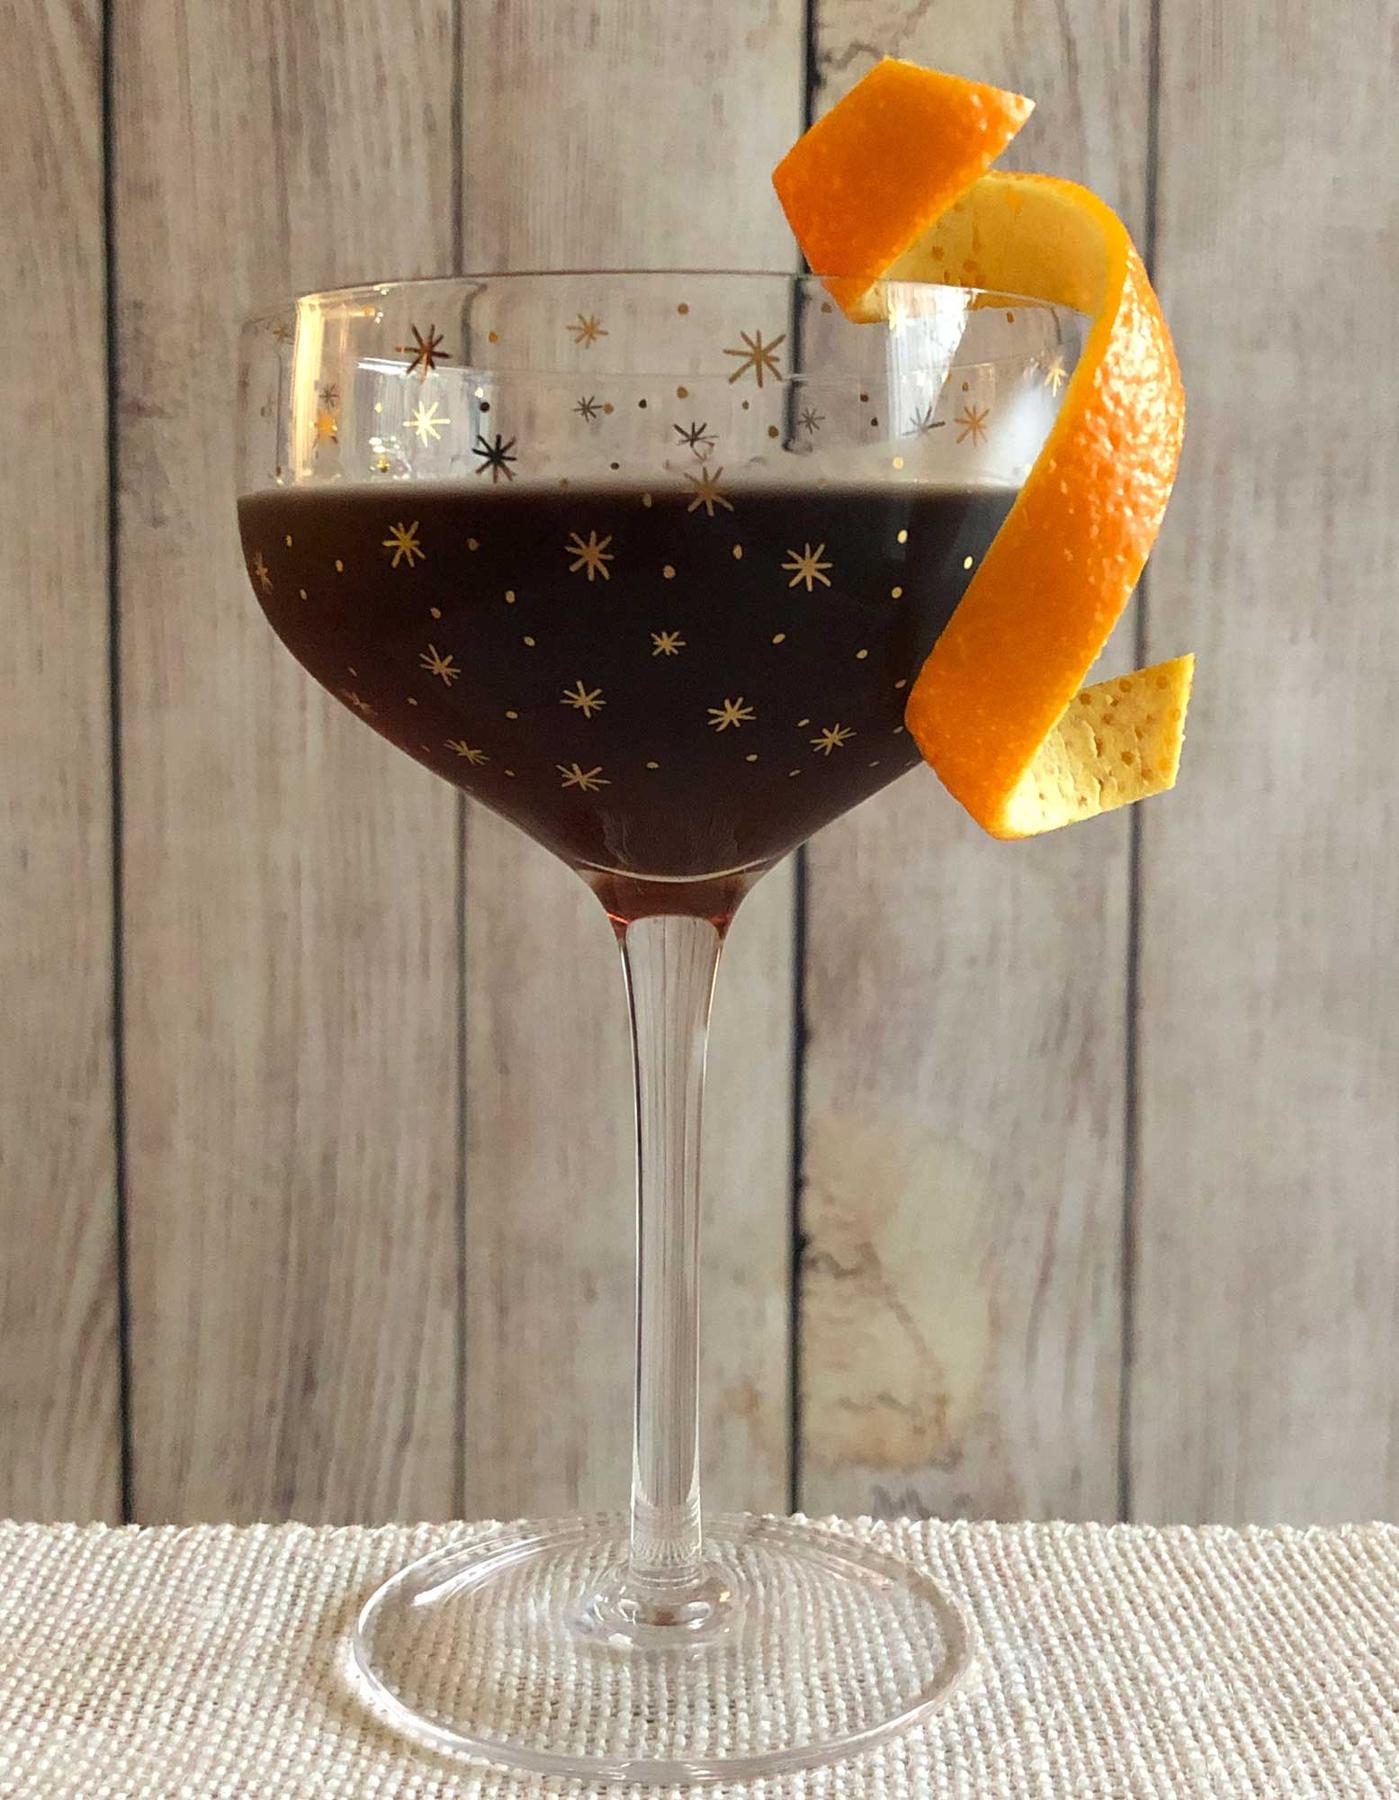 An example of the El Poco Loco, the mixed drink (drink) featuring Hayman’s Old Tom Gin, Dolin Rouge Vermouth de Chambéry, Nux Alpina Walnut Liqueur, and orange twist; photo by Lee Edwards